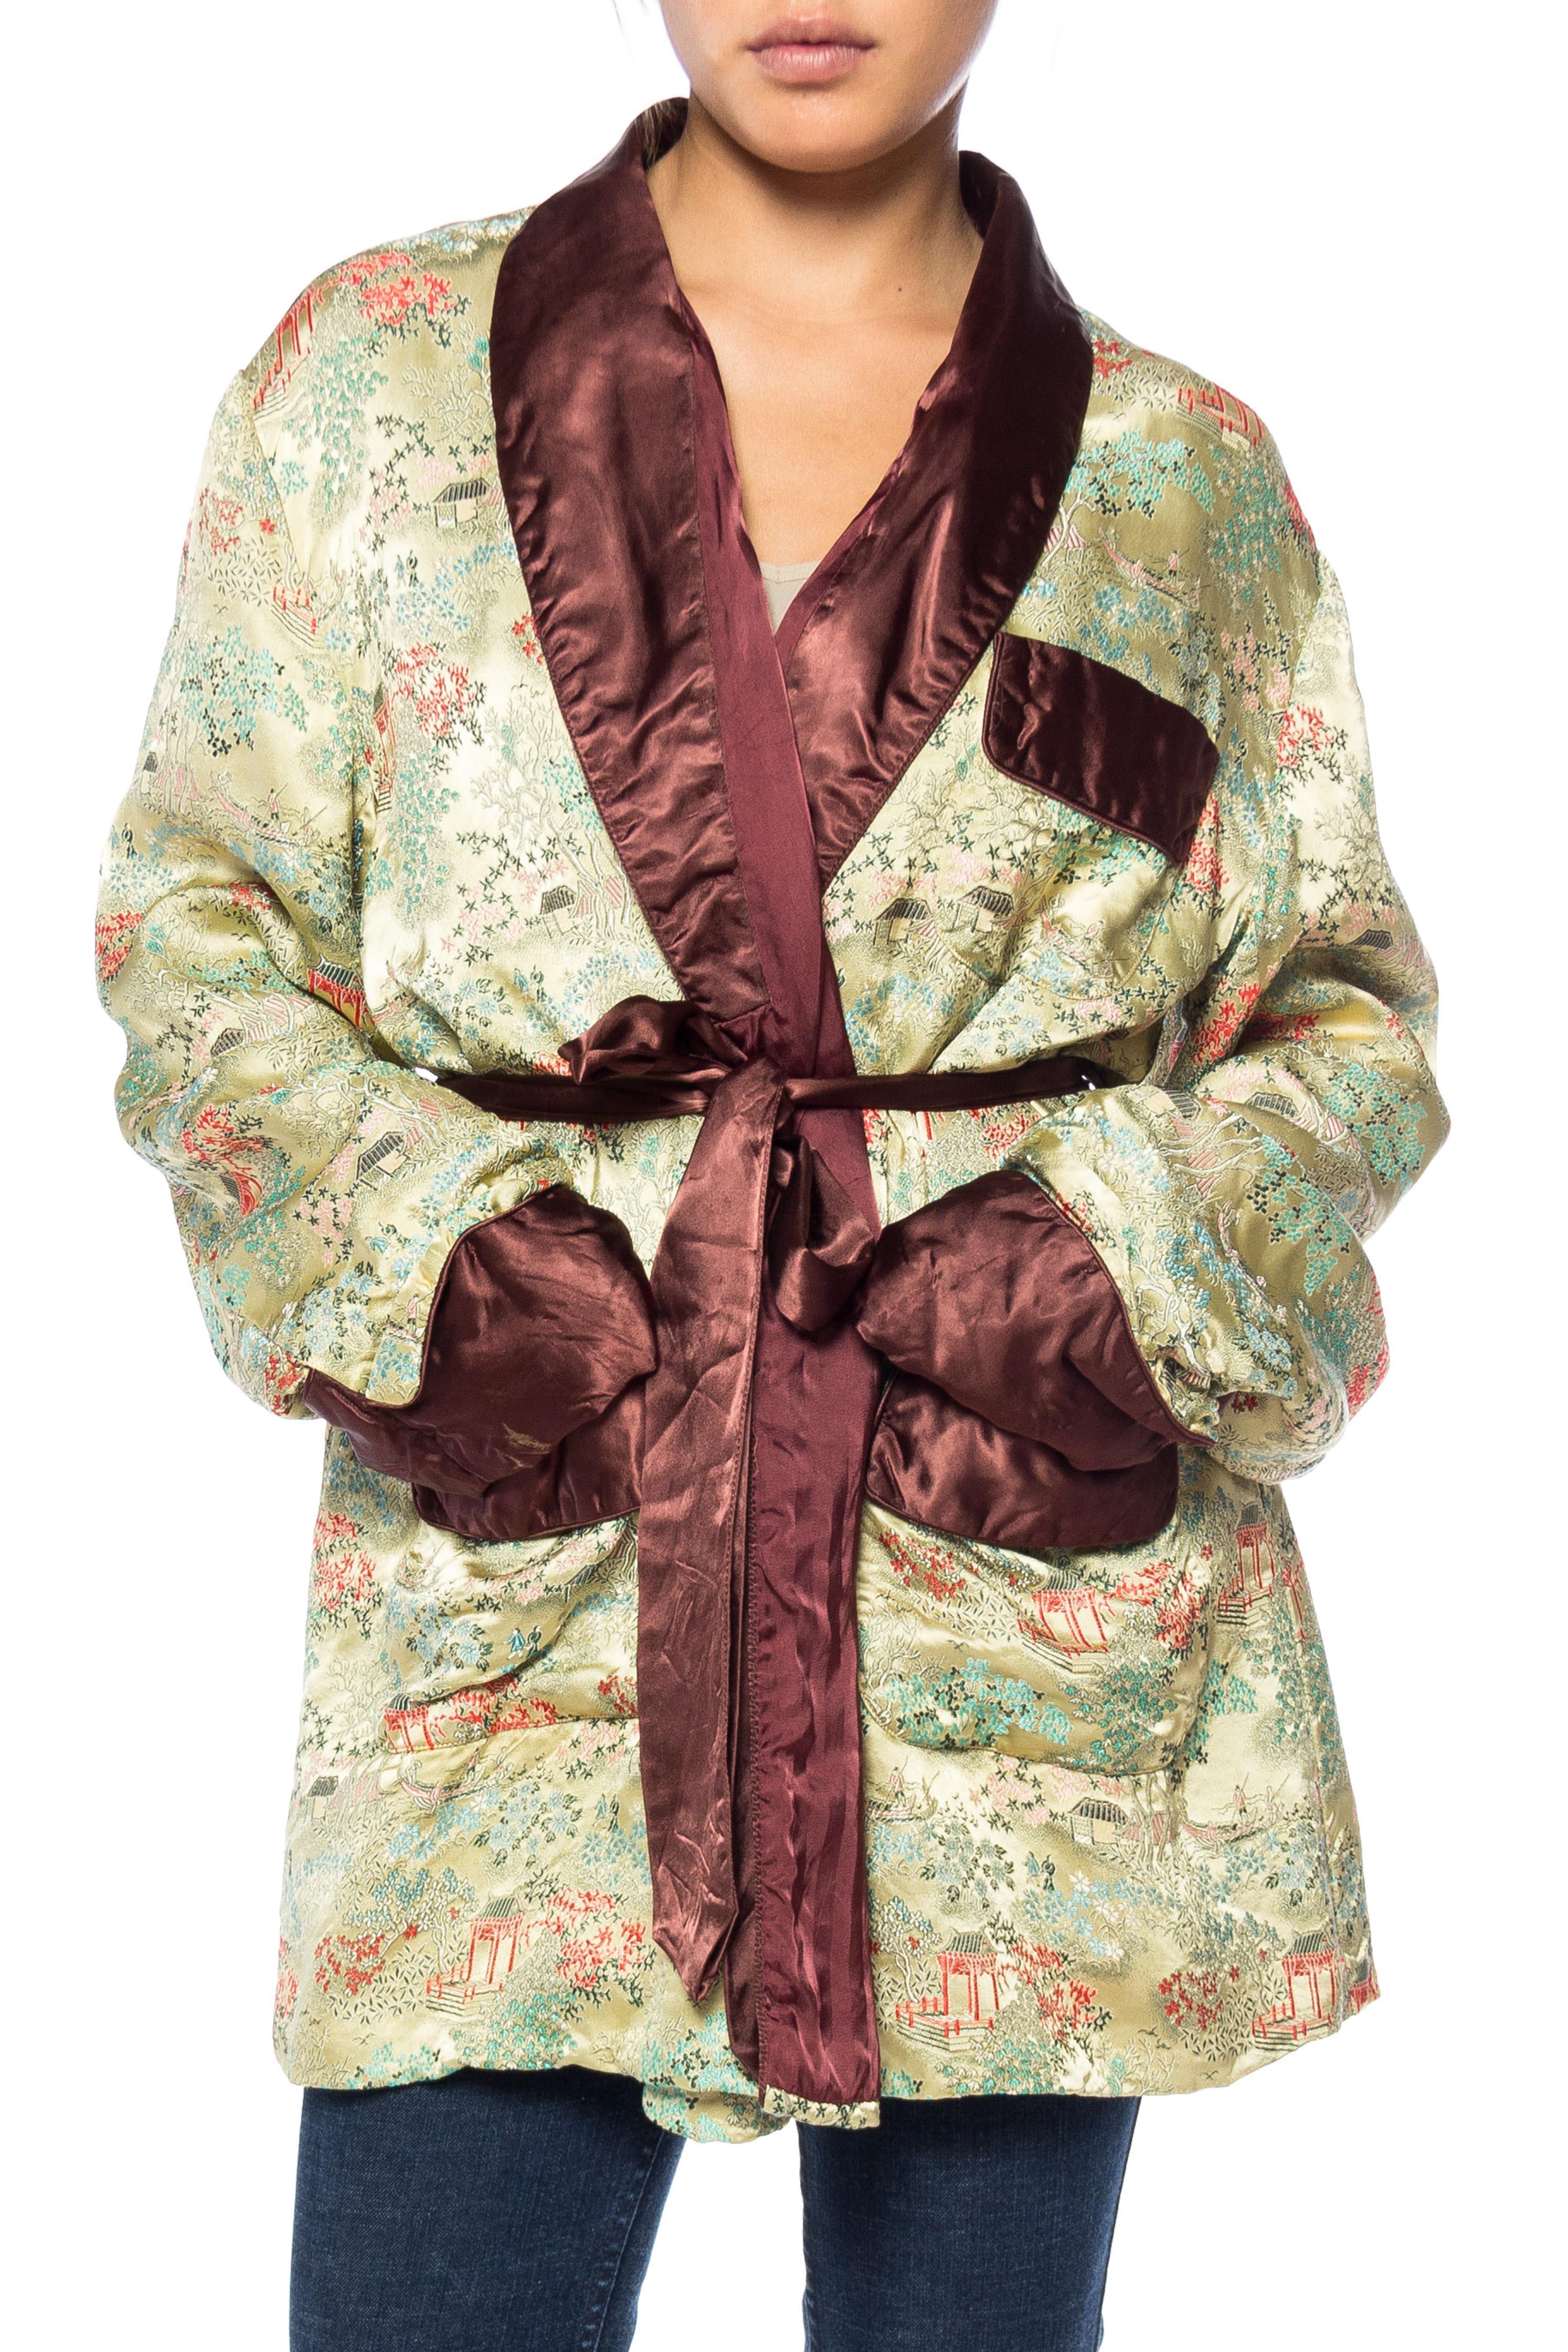 Tagged a European size 48 1960S Rayon Jacquard Asian Landscape Patterned Men's Smoking Robe